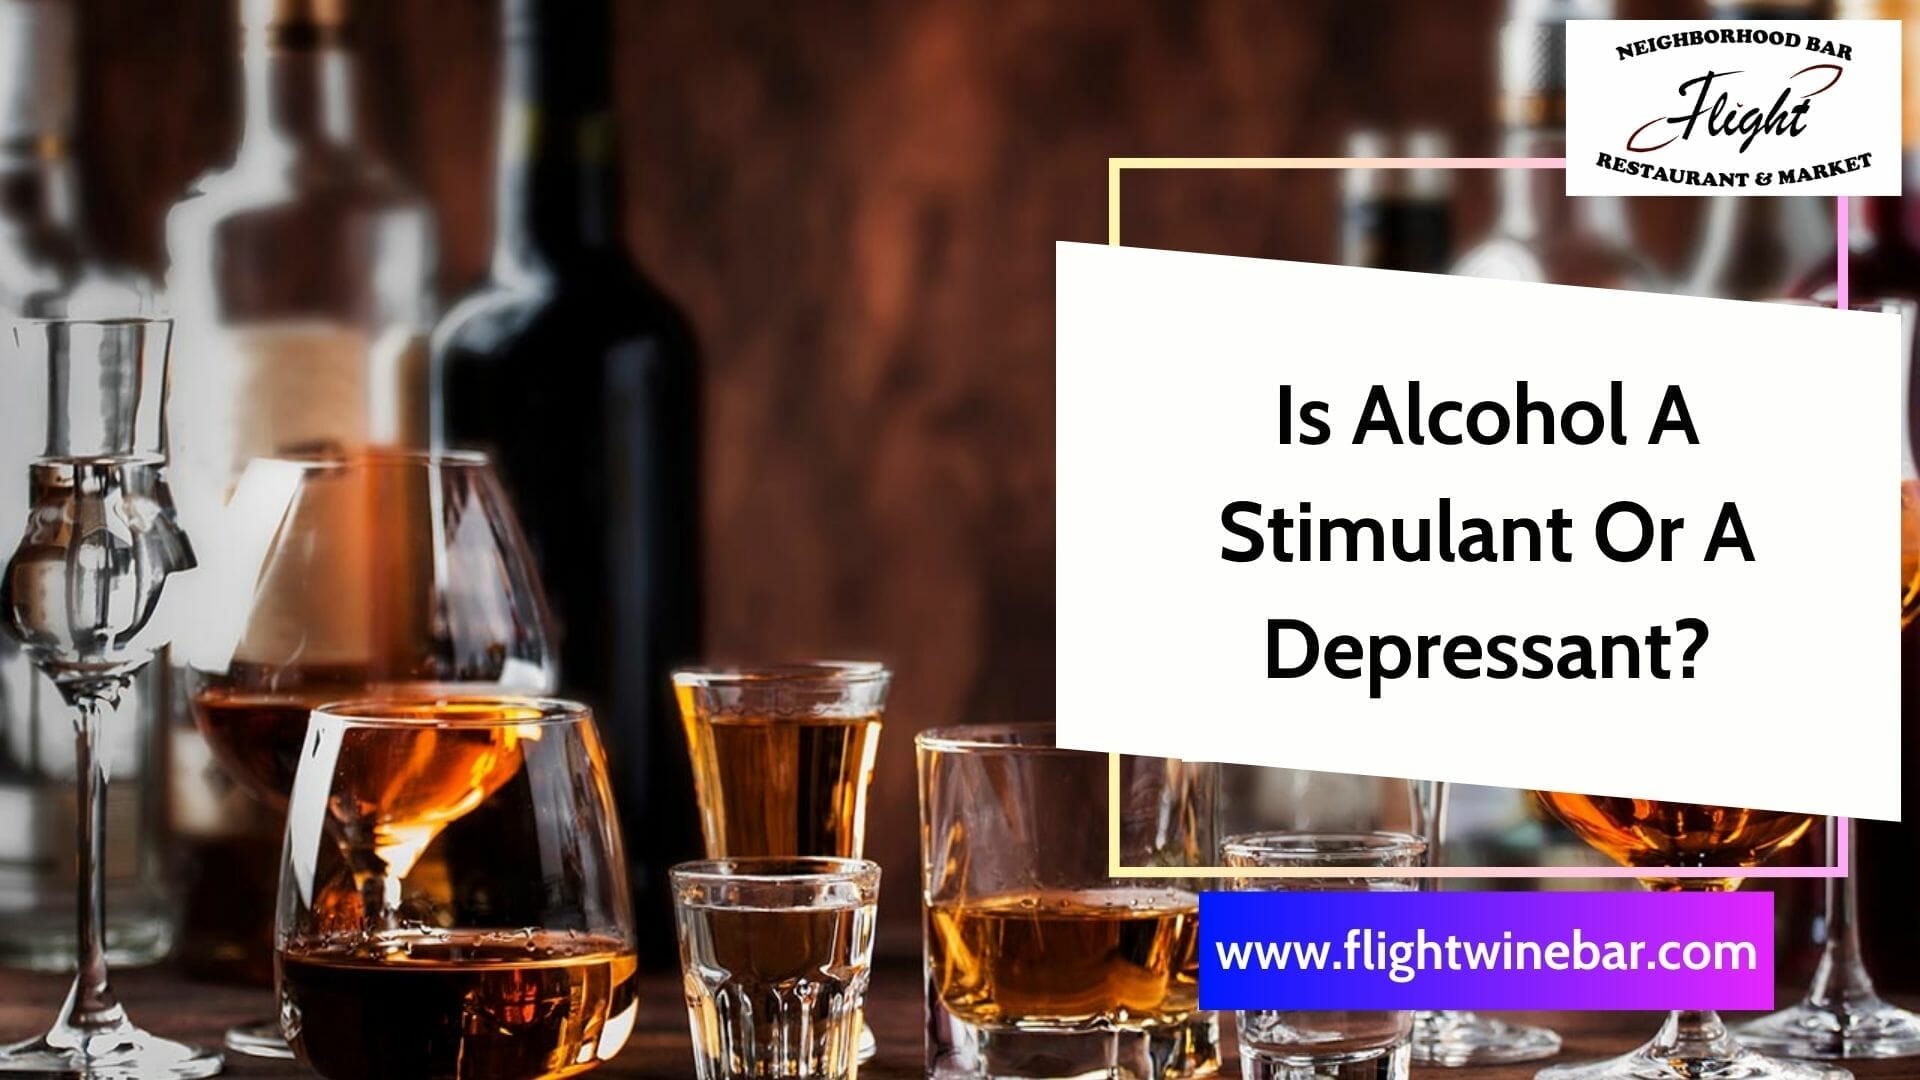 Is Alcohol A Stimulant Or A Depressant